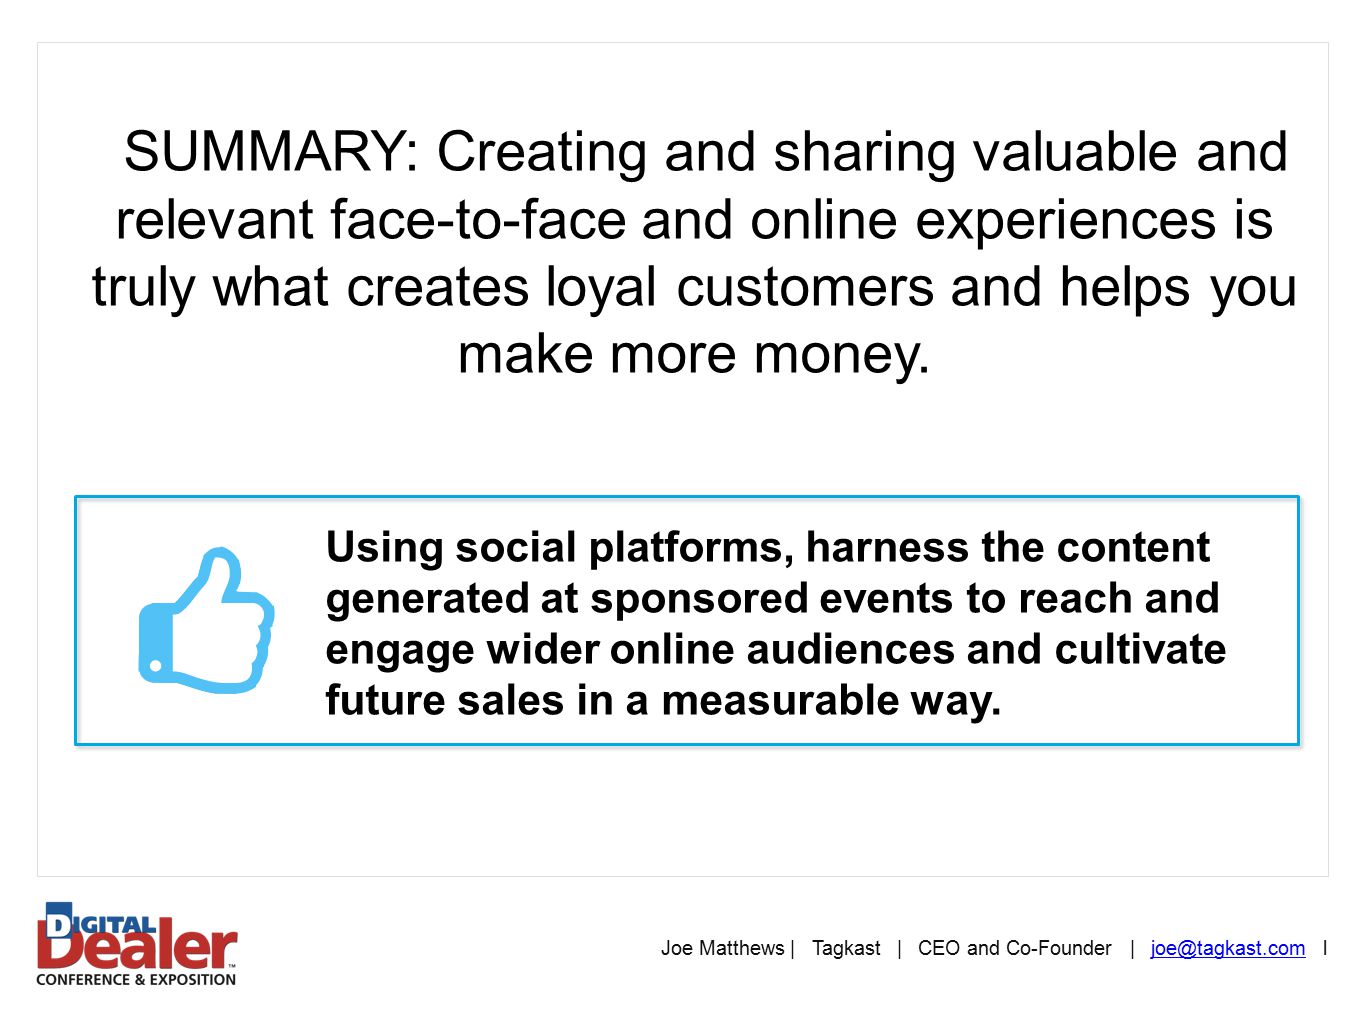 SUMMARY: Creating and sharing valuable and relevant face-to-face and online experiences is truly what creates loyal customers and helps you make more money.